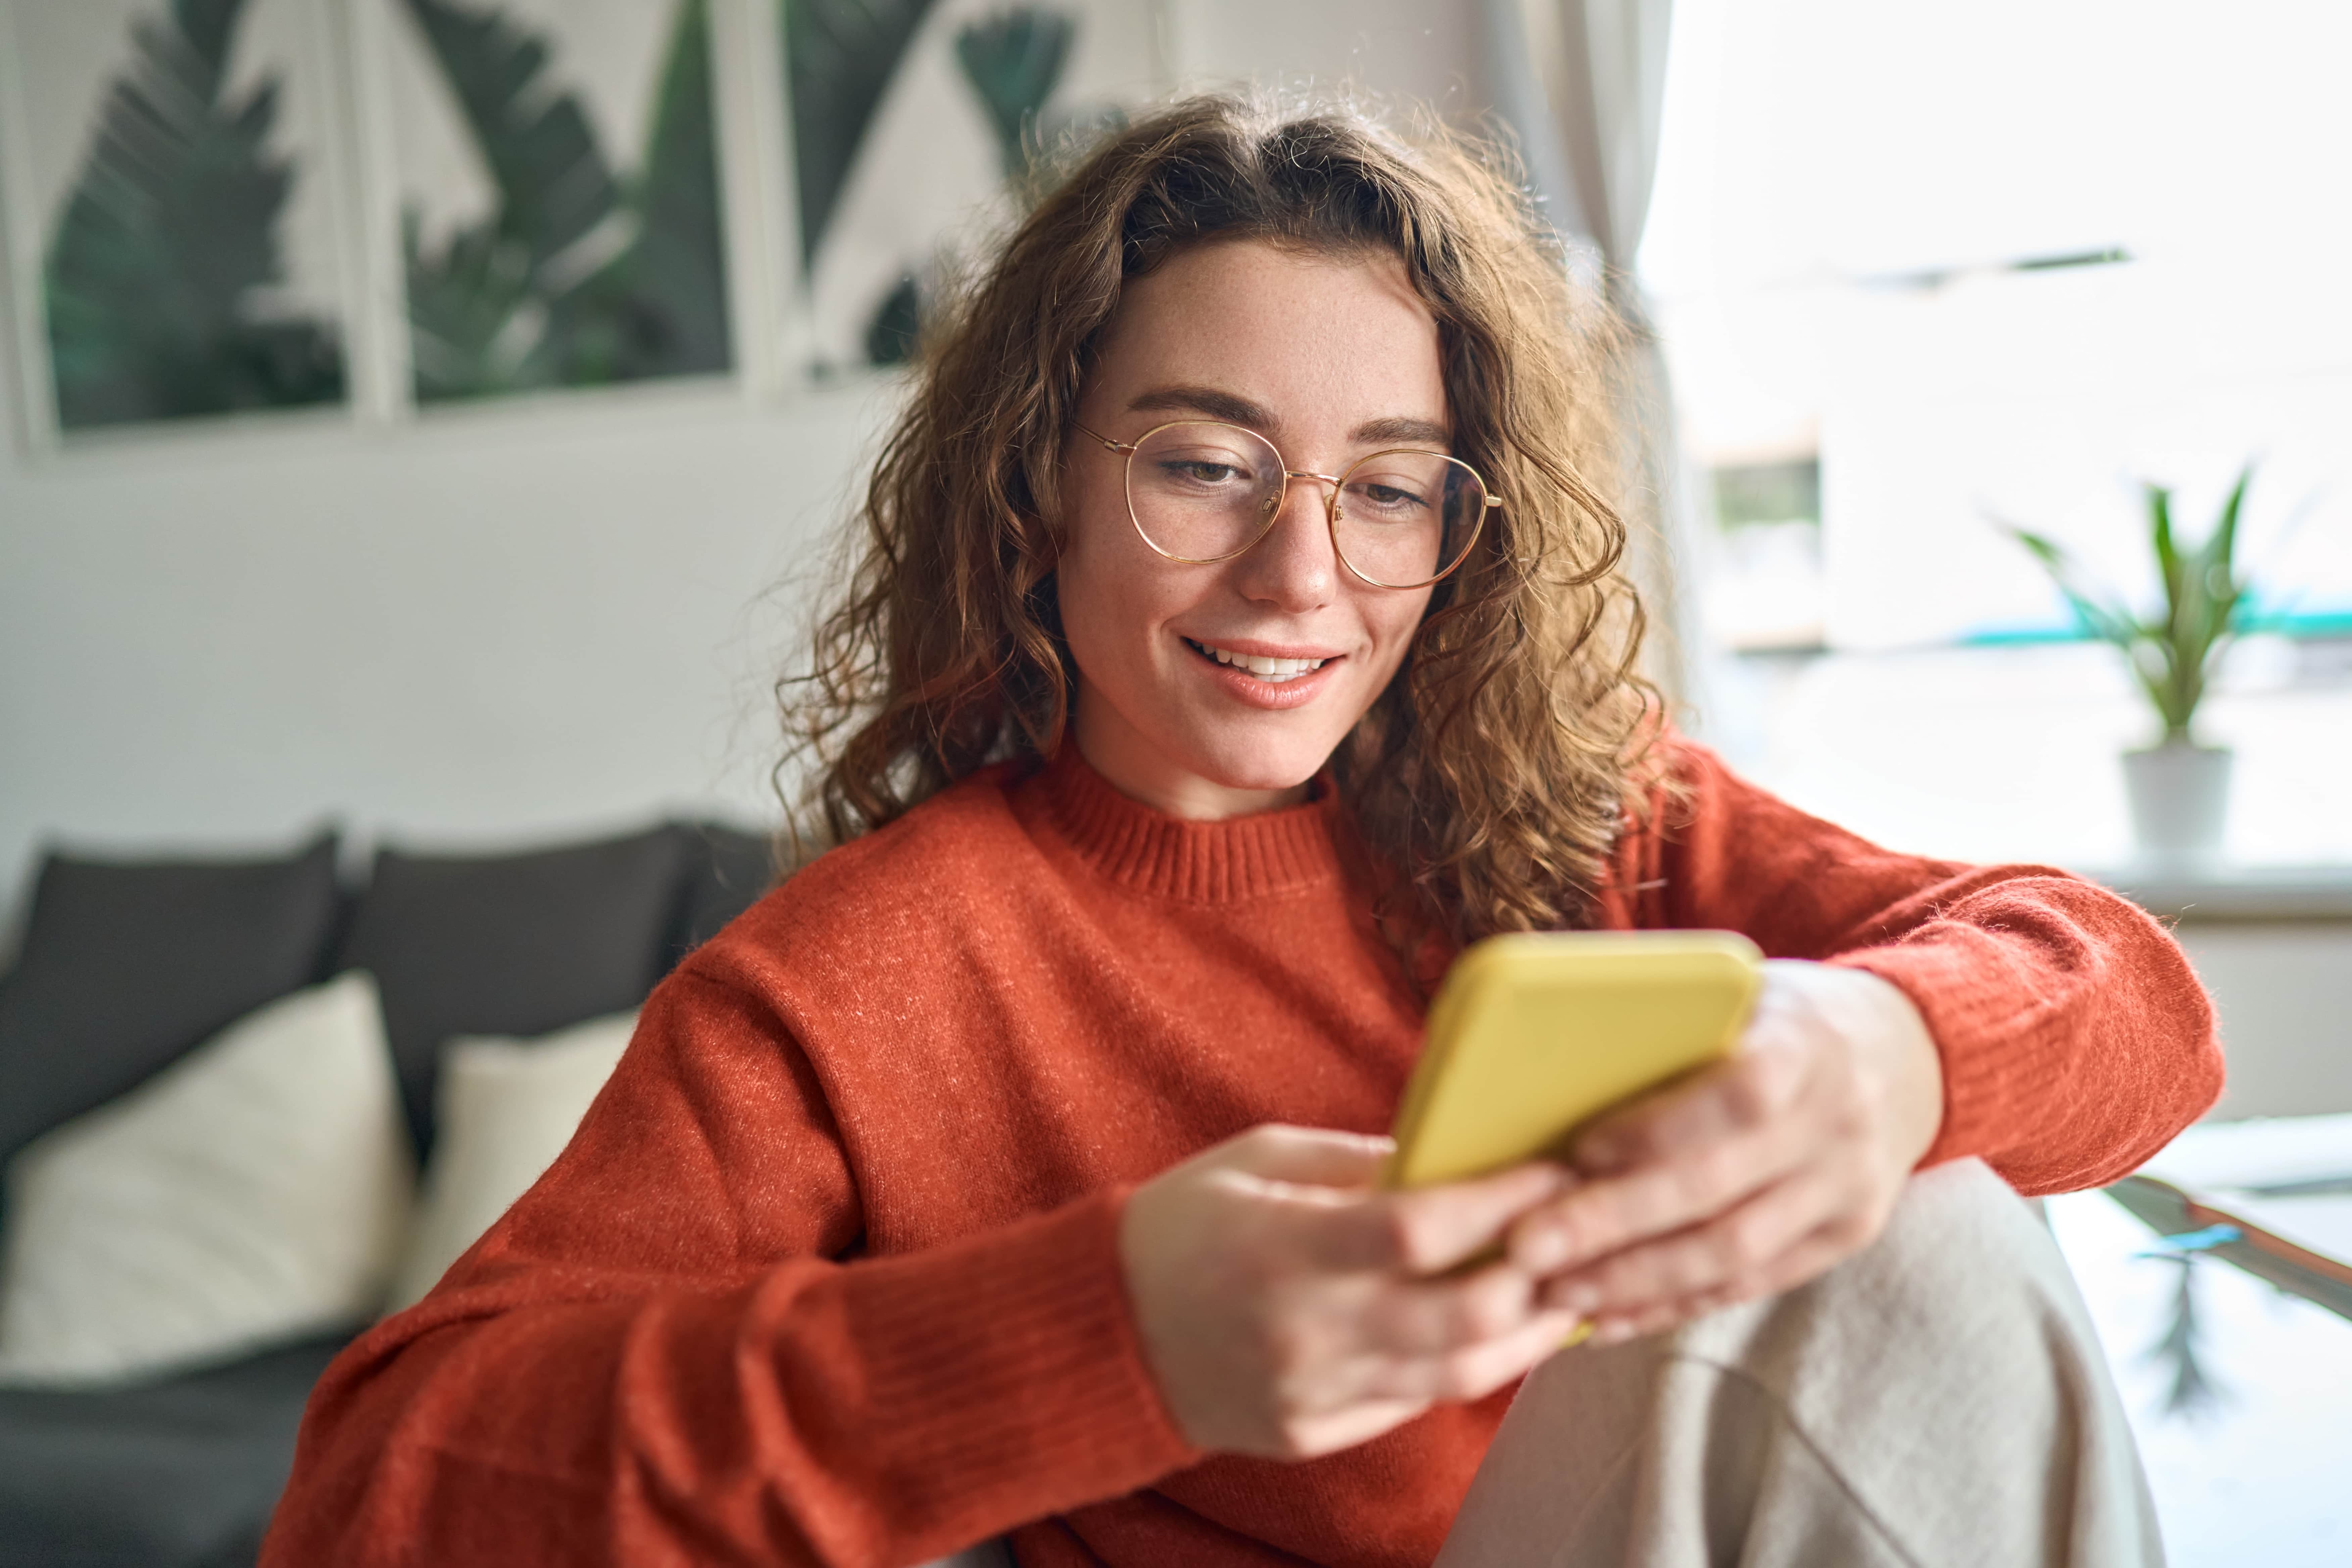 Young woman with glasses looking at her phone and smiling